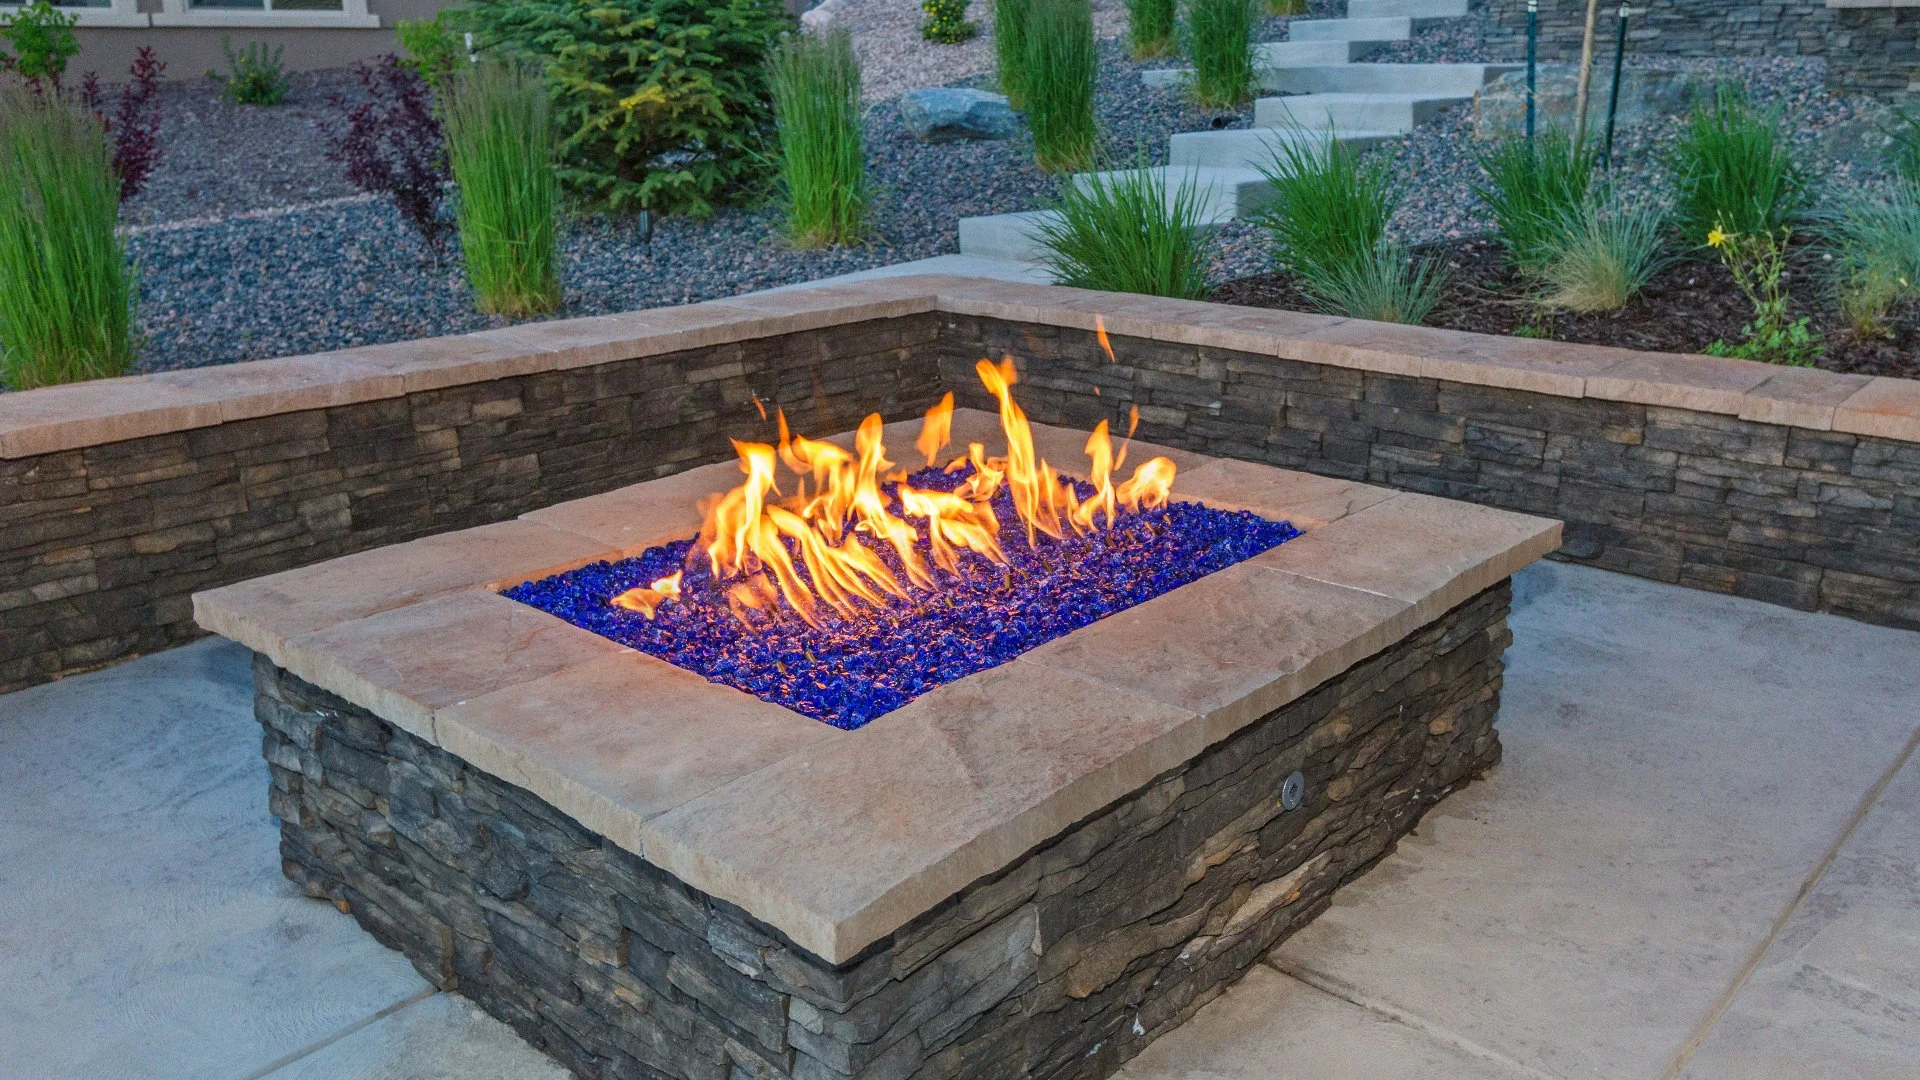 3 Fire Features to Consider Adding to Your Outdoor Living Space